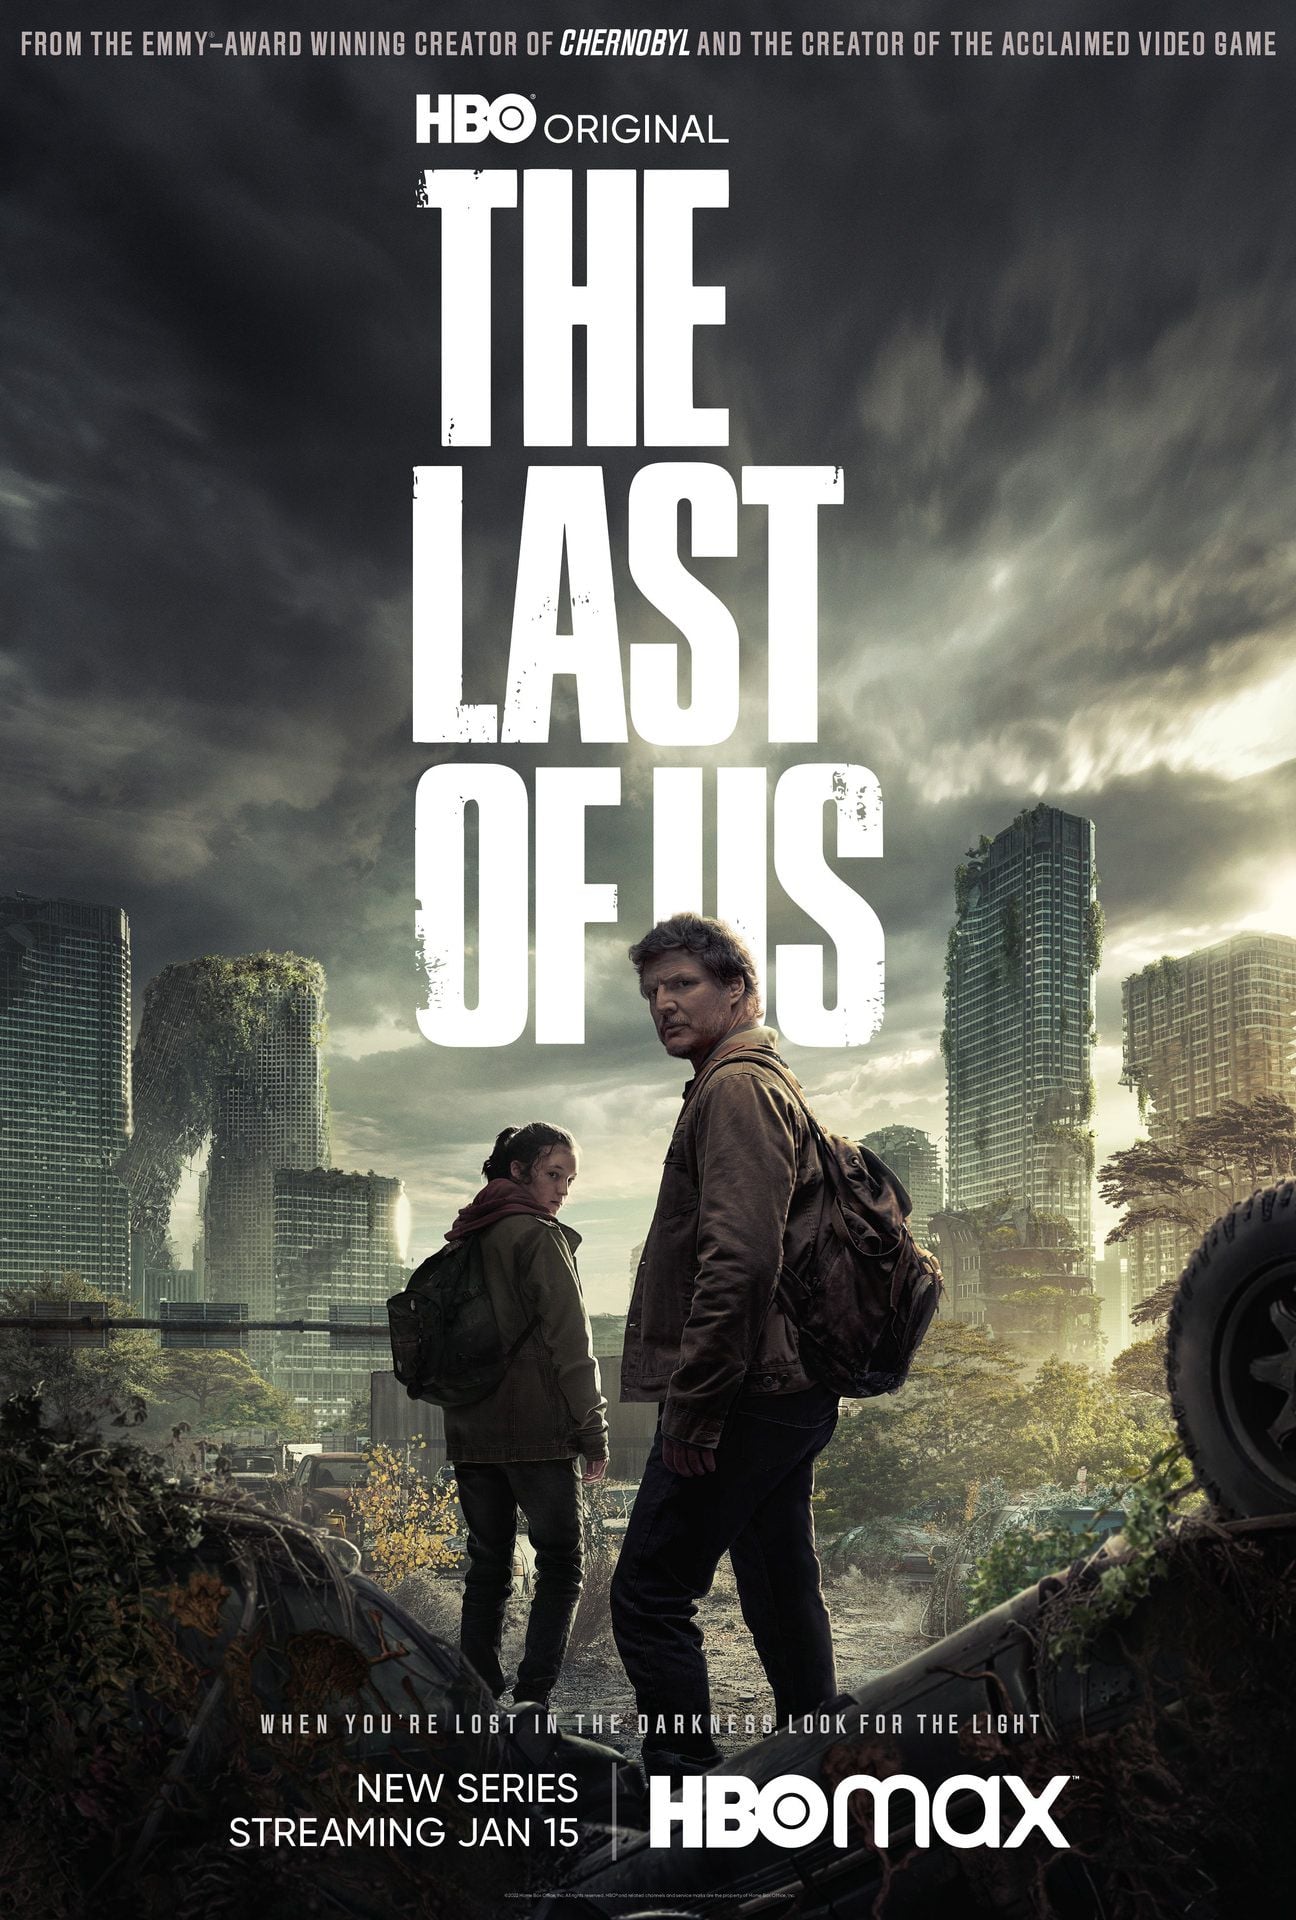 The last of us Font - forum